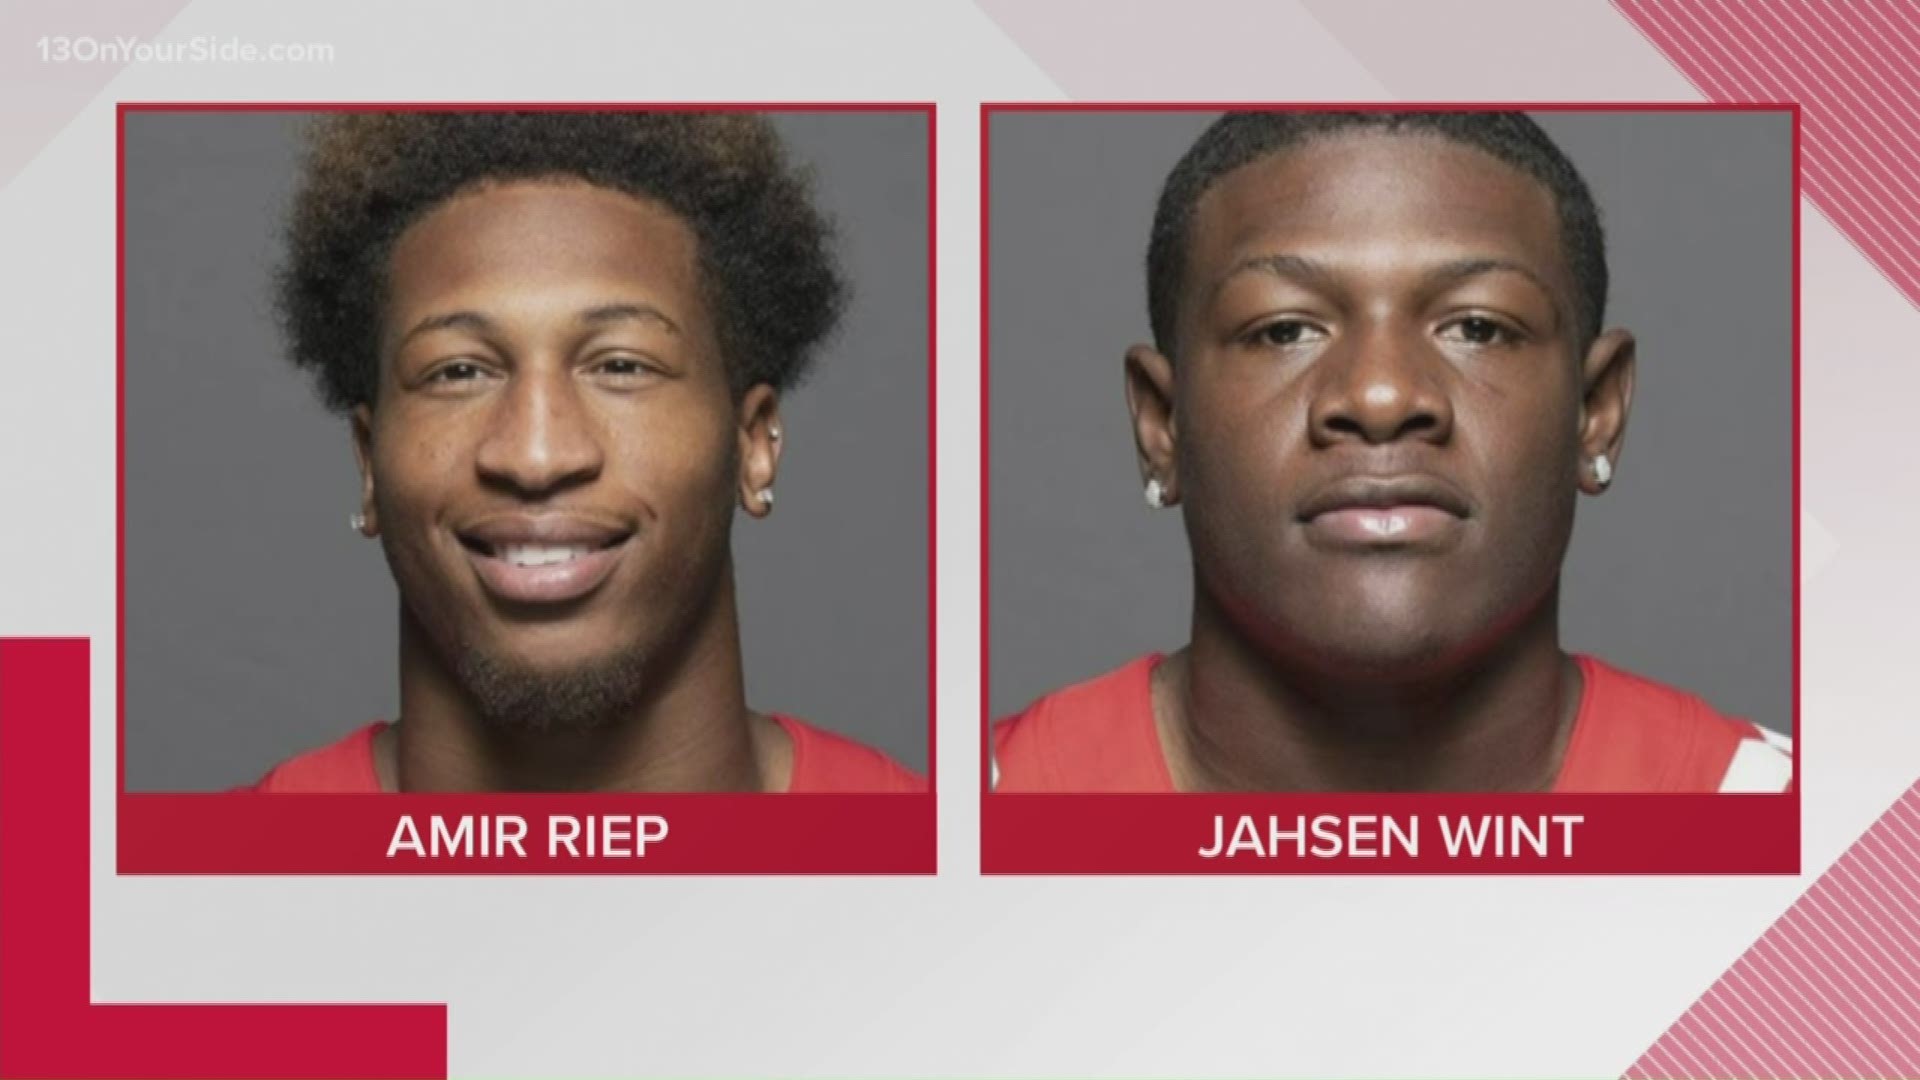 Two Ohio State students and football players are charged with rape and kidnapping, according to Franklin County municipal court records.